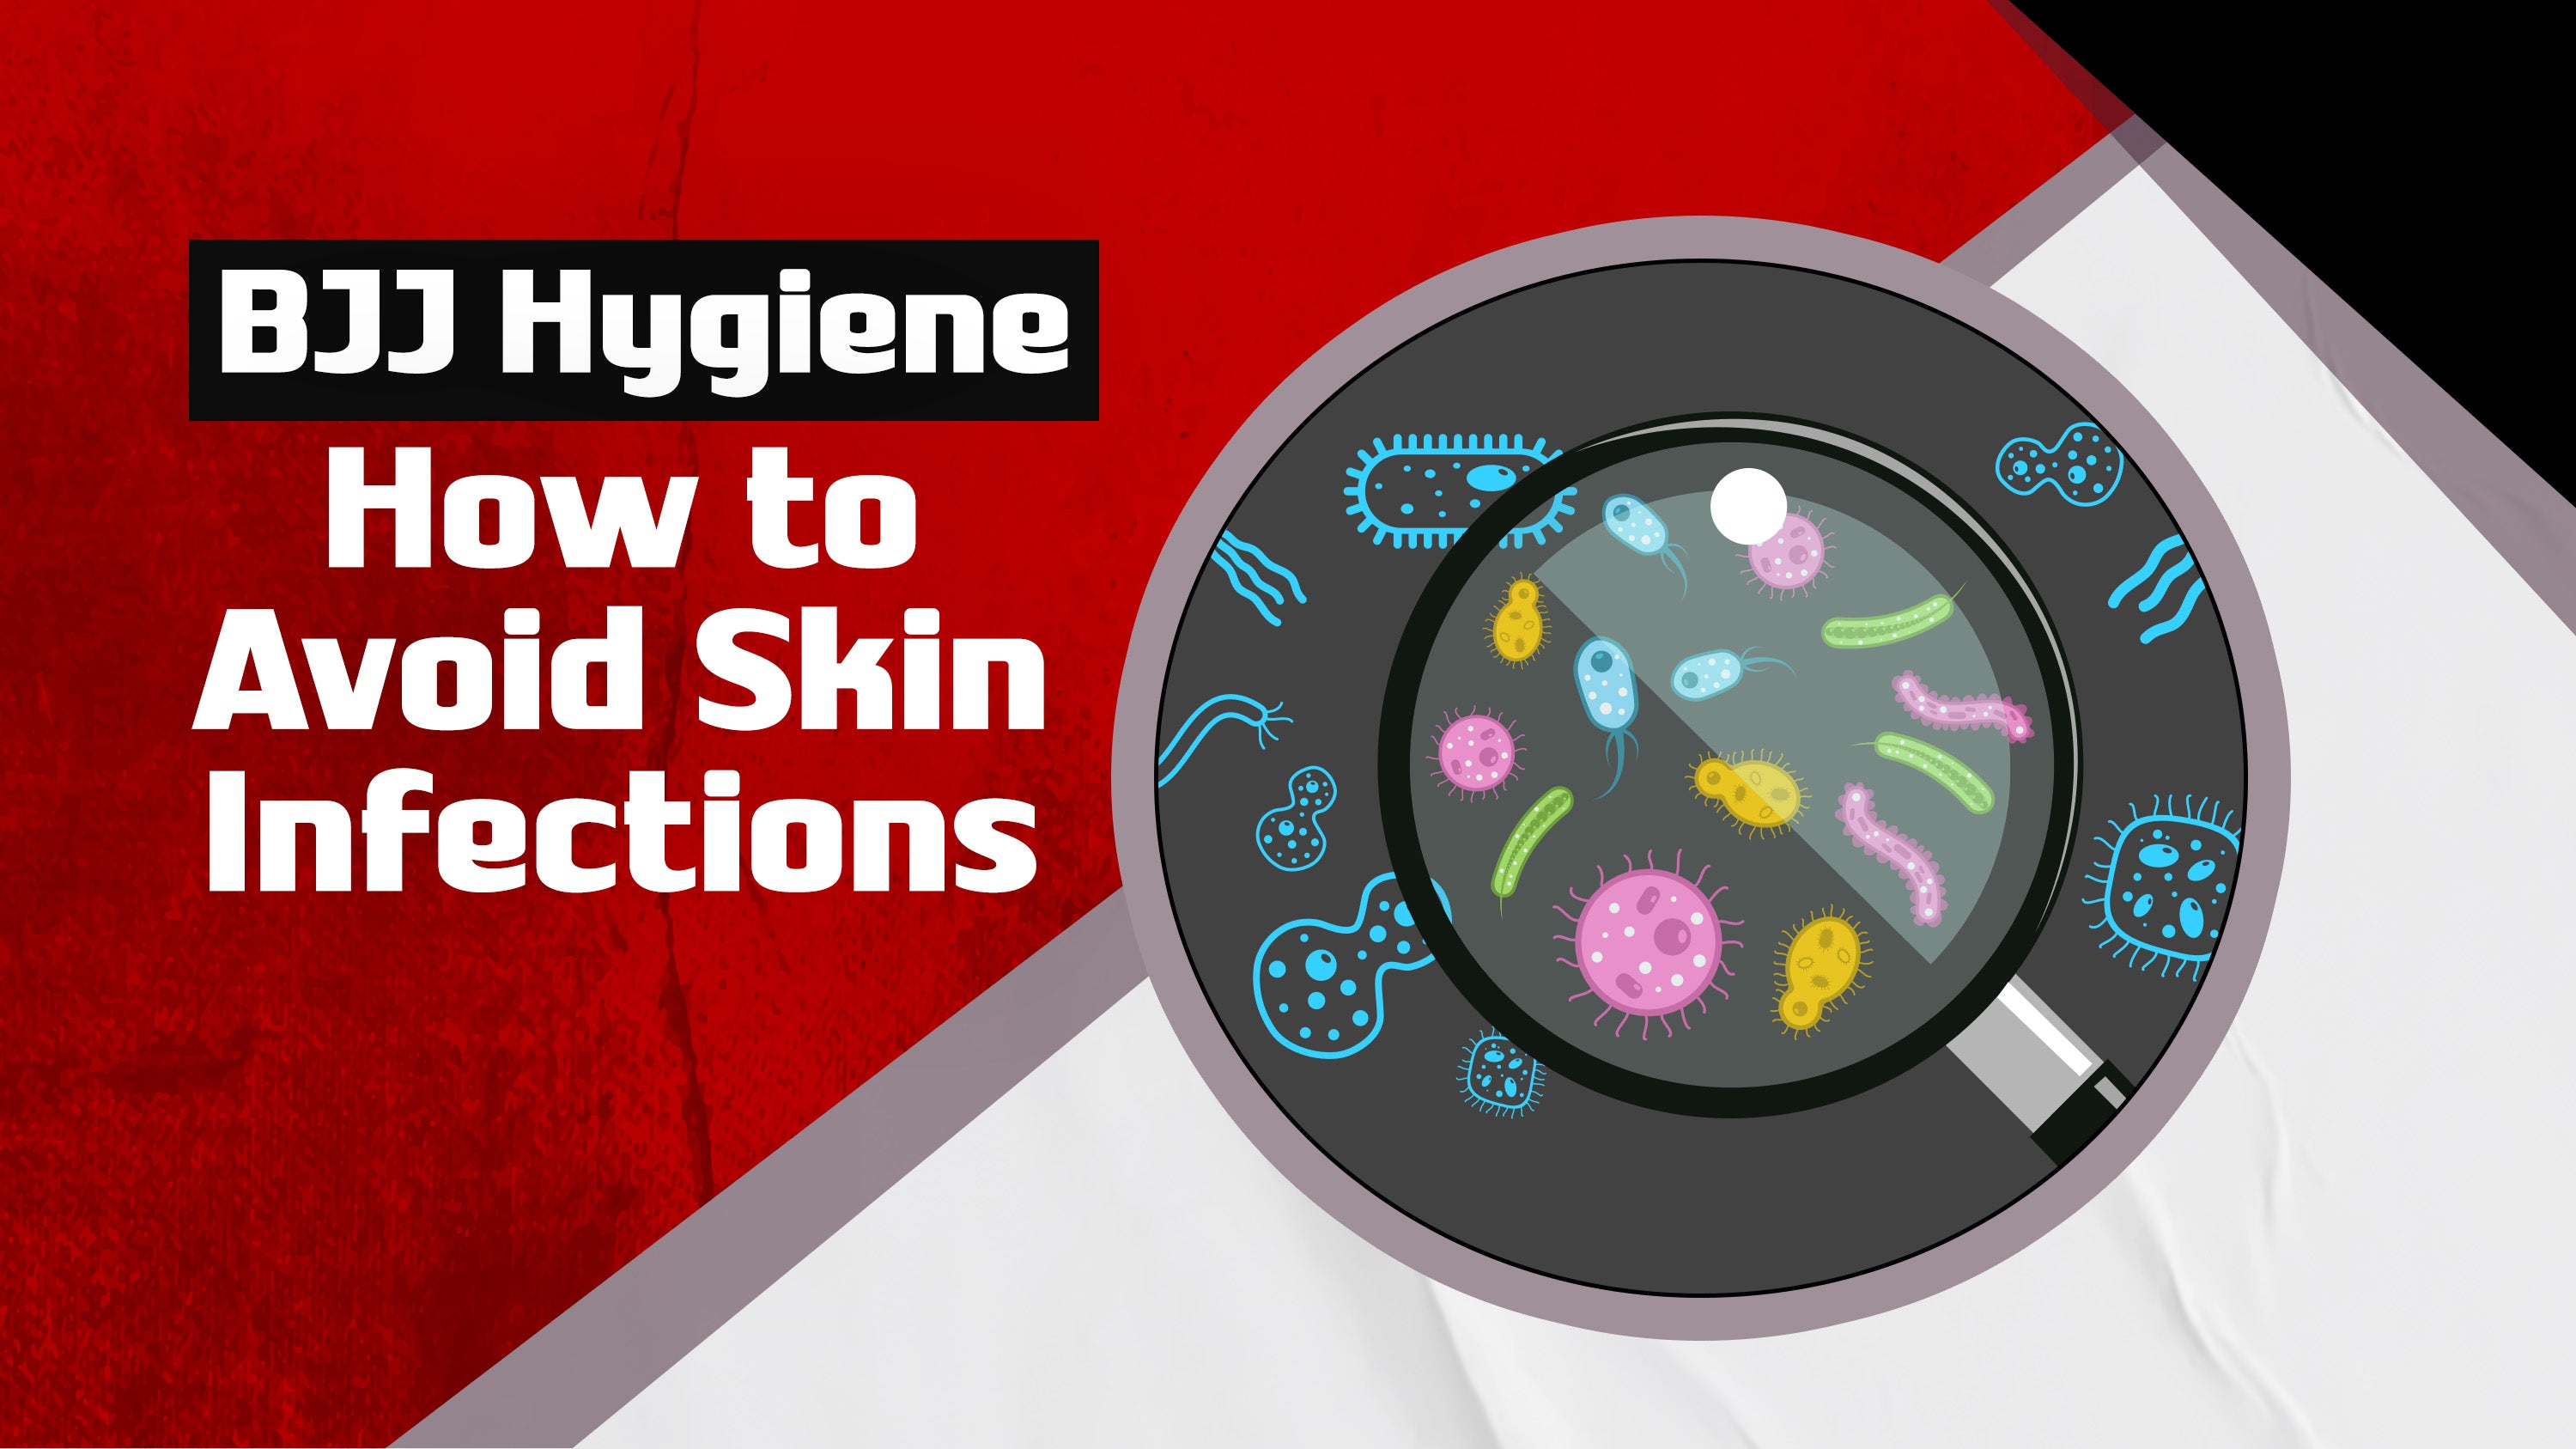 BJJ Hygiene: How to Avoid Skin Infections